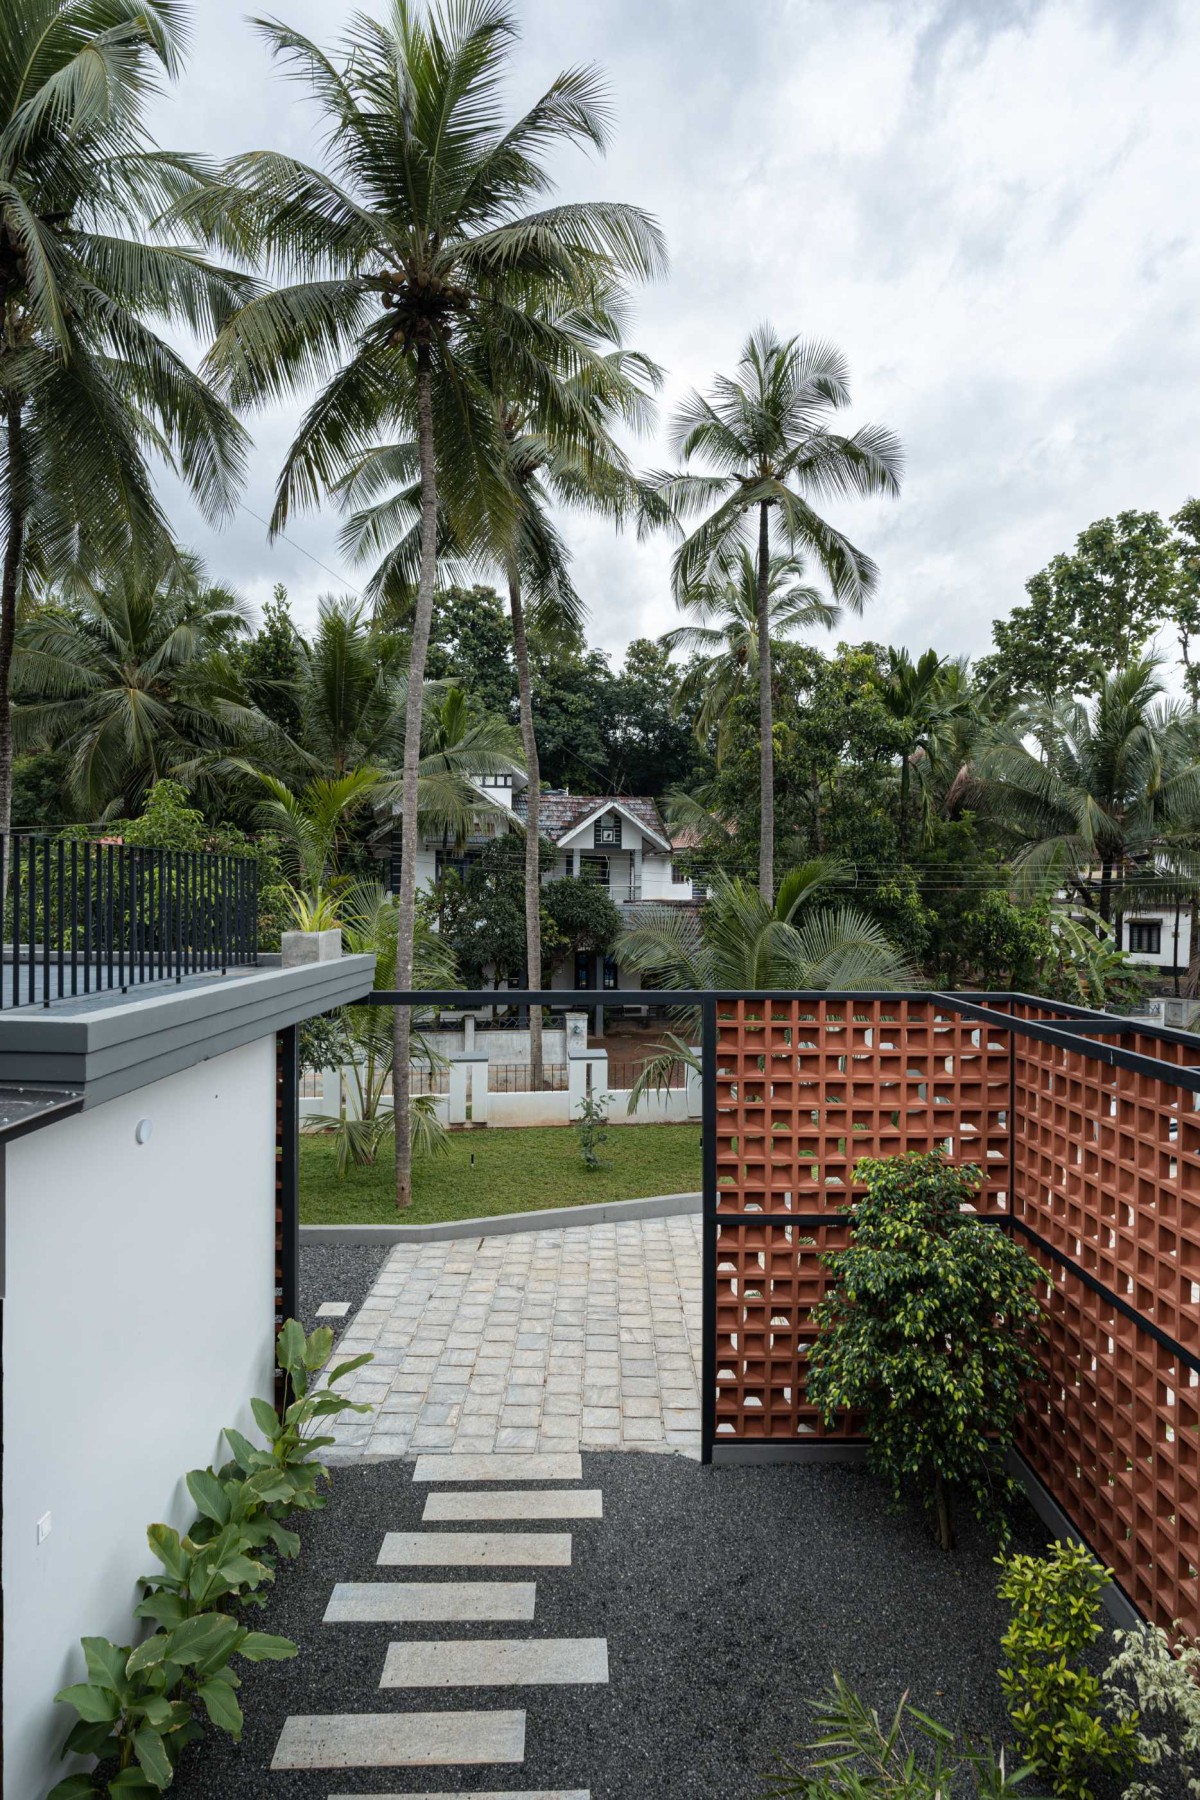 Entrance view of Cent Home by FiF Studio